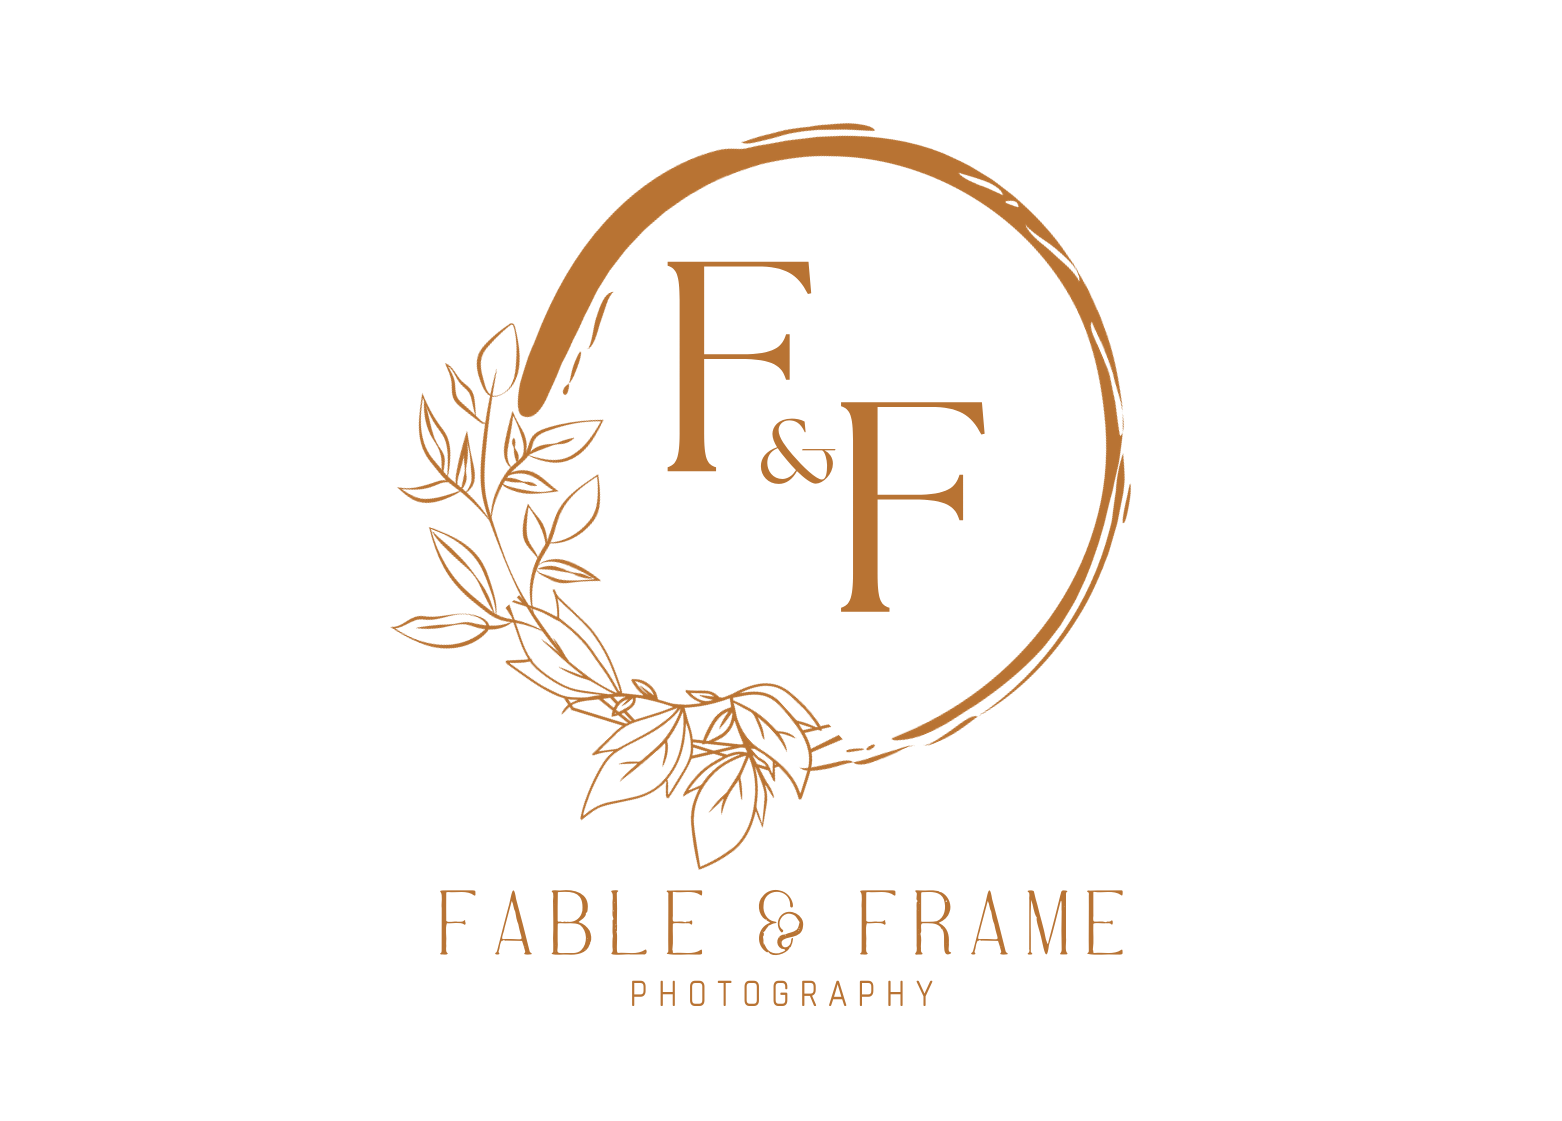 Fable and frame photography